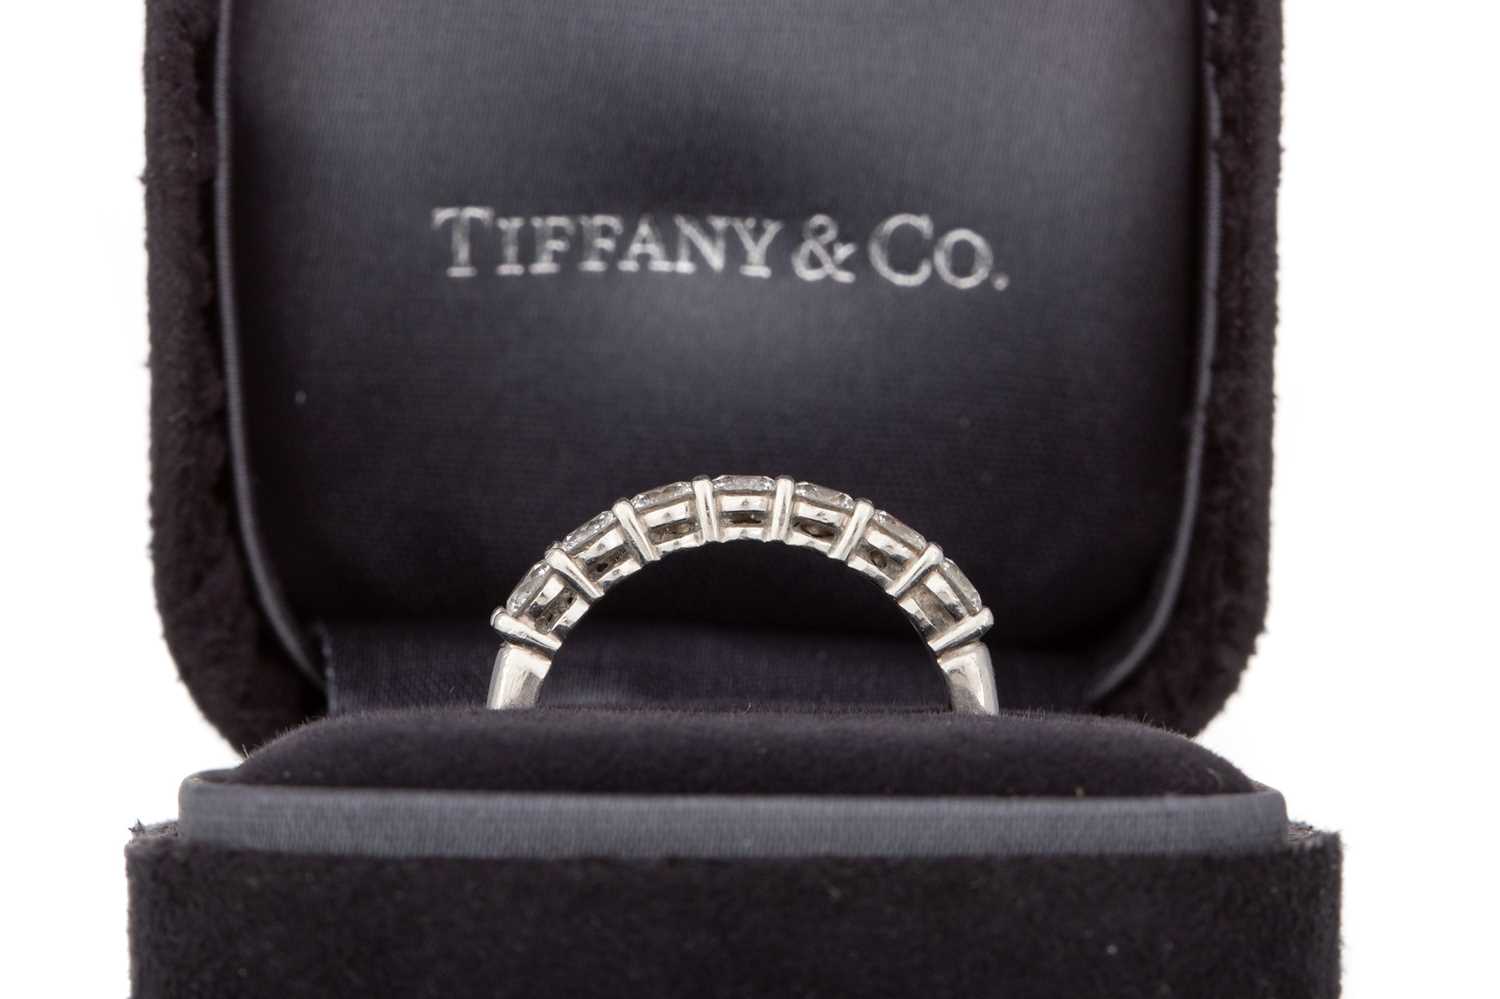 TIFFANY & CO 'FOREVER' DIAMOND SEVEN STONE RING, - Image 3 of 3